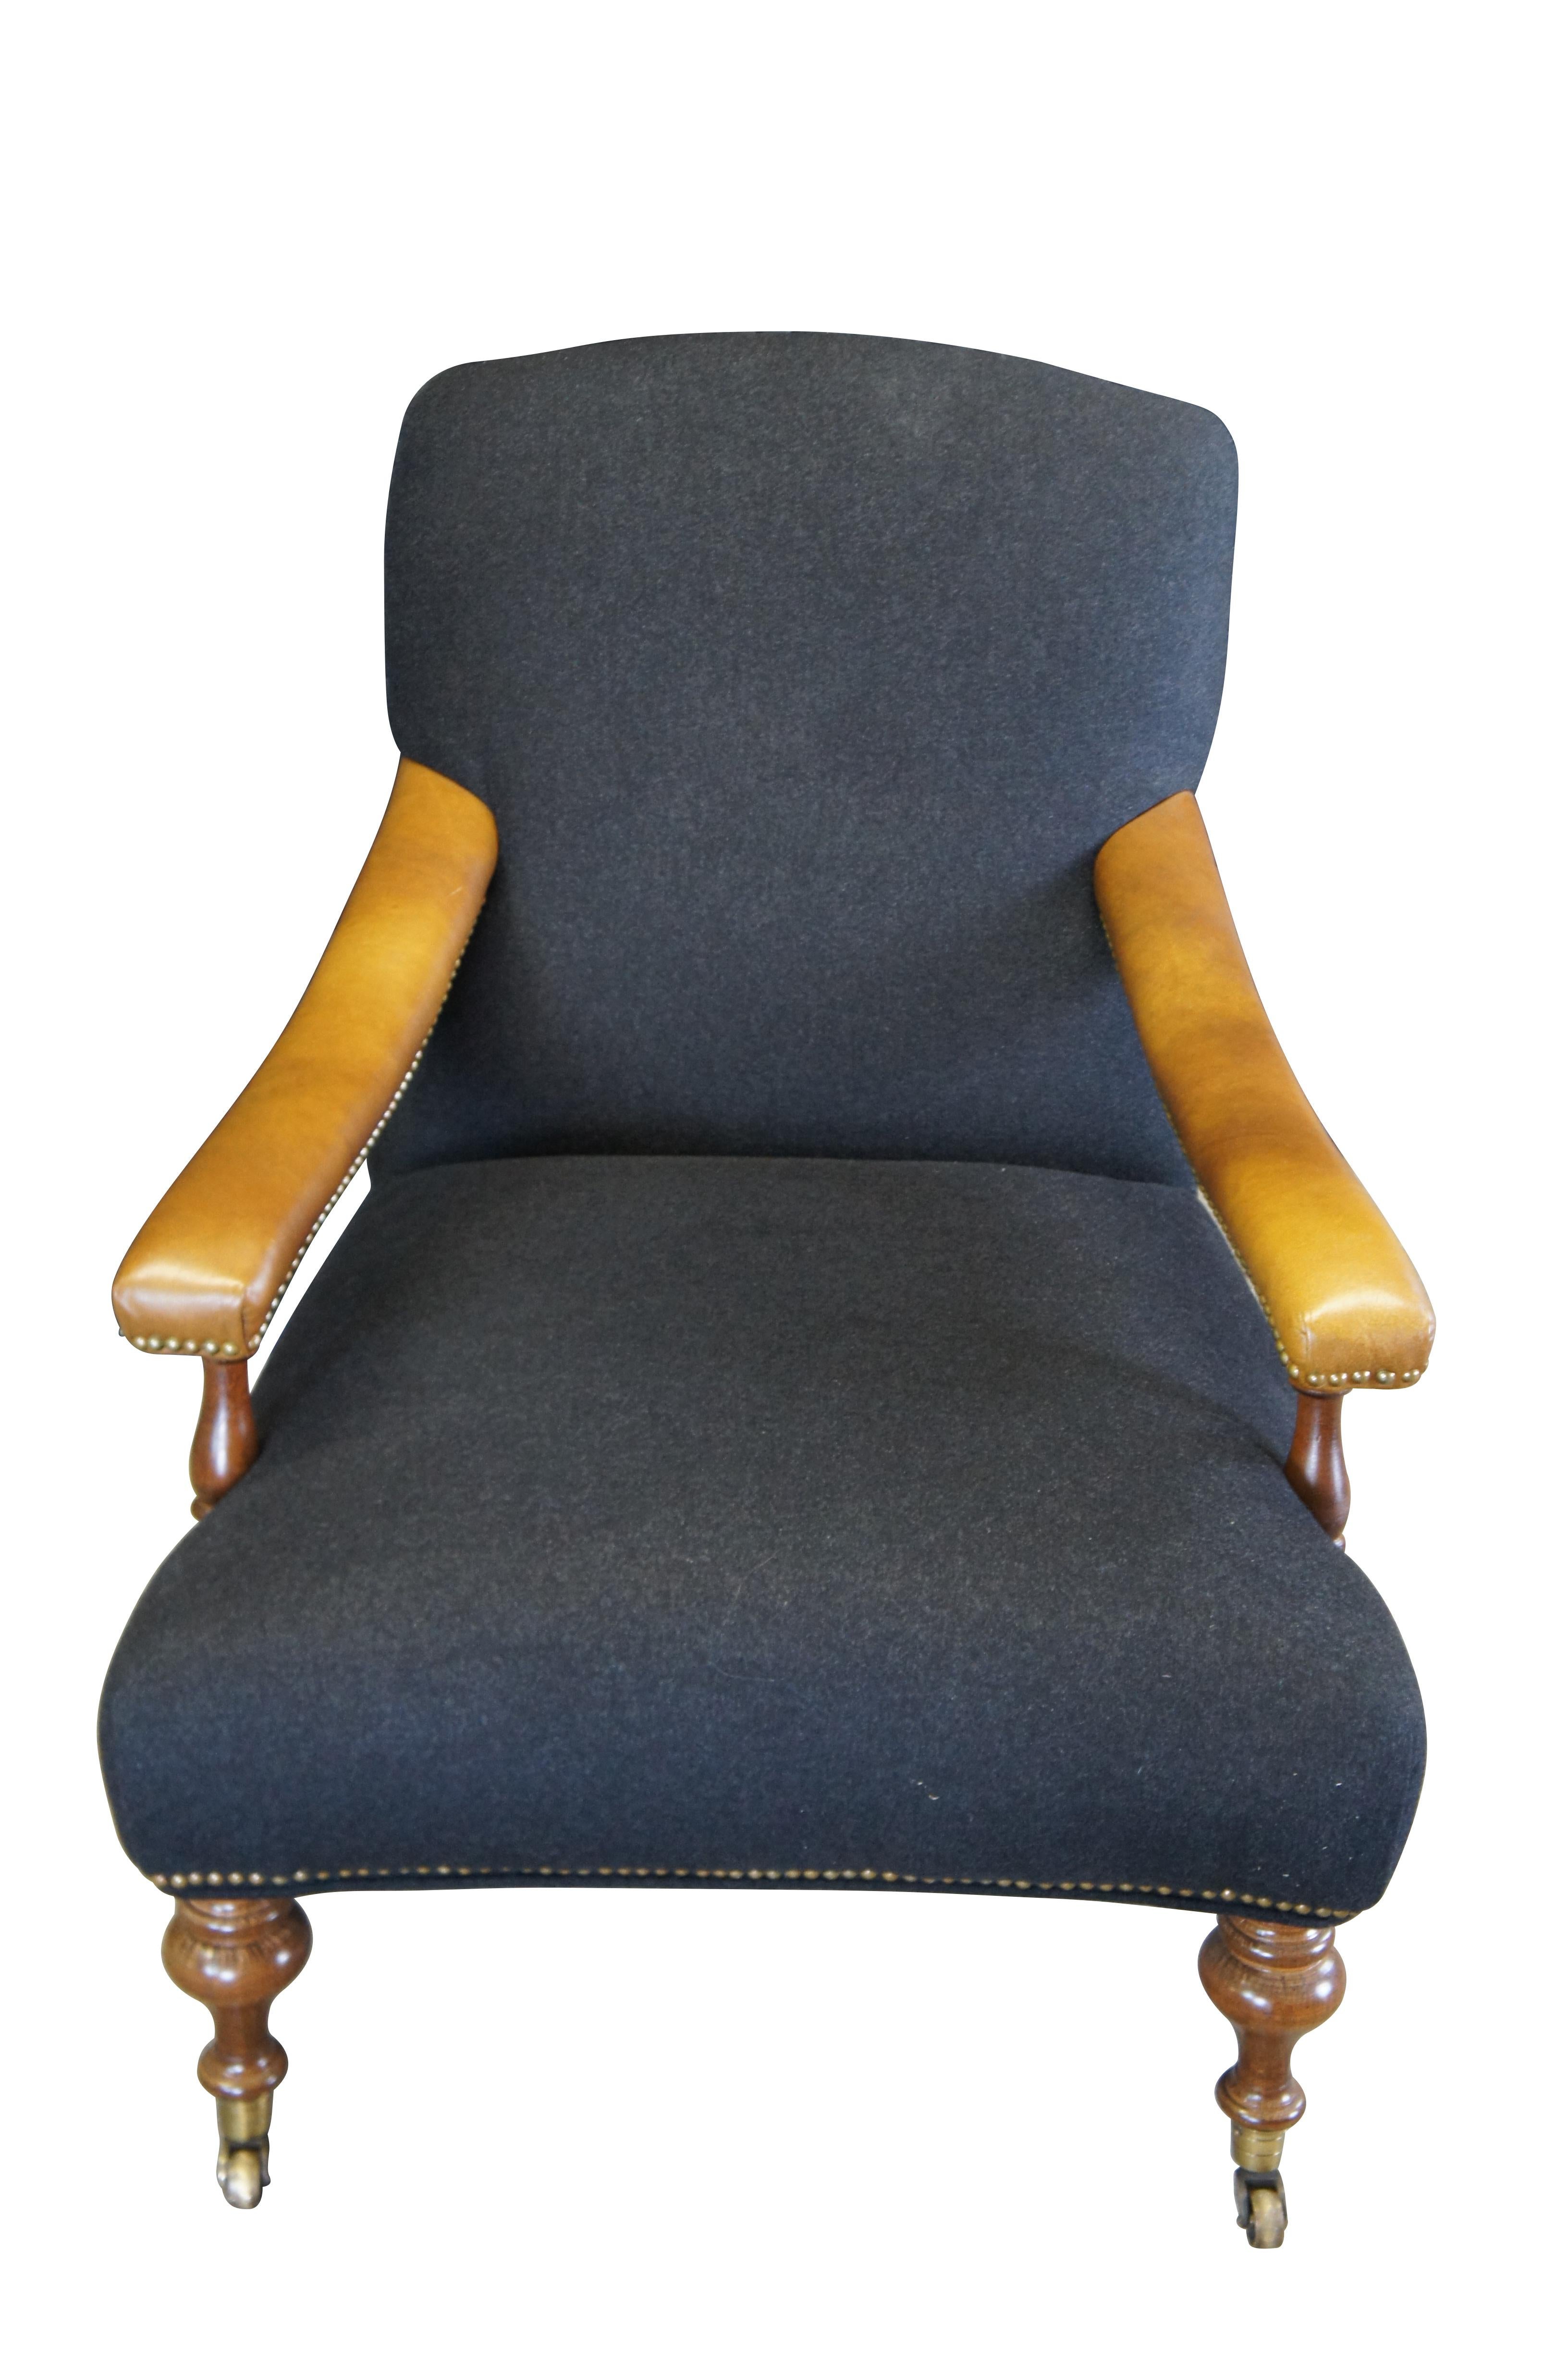 Vintage Lee Industries club / library / lounge / fireside arm chair featuring leather and a blue-grey Ralph Lauren flannel fabric with nailhead trim and turned walnut frame.  #1542

Dimensions:
29